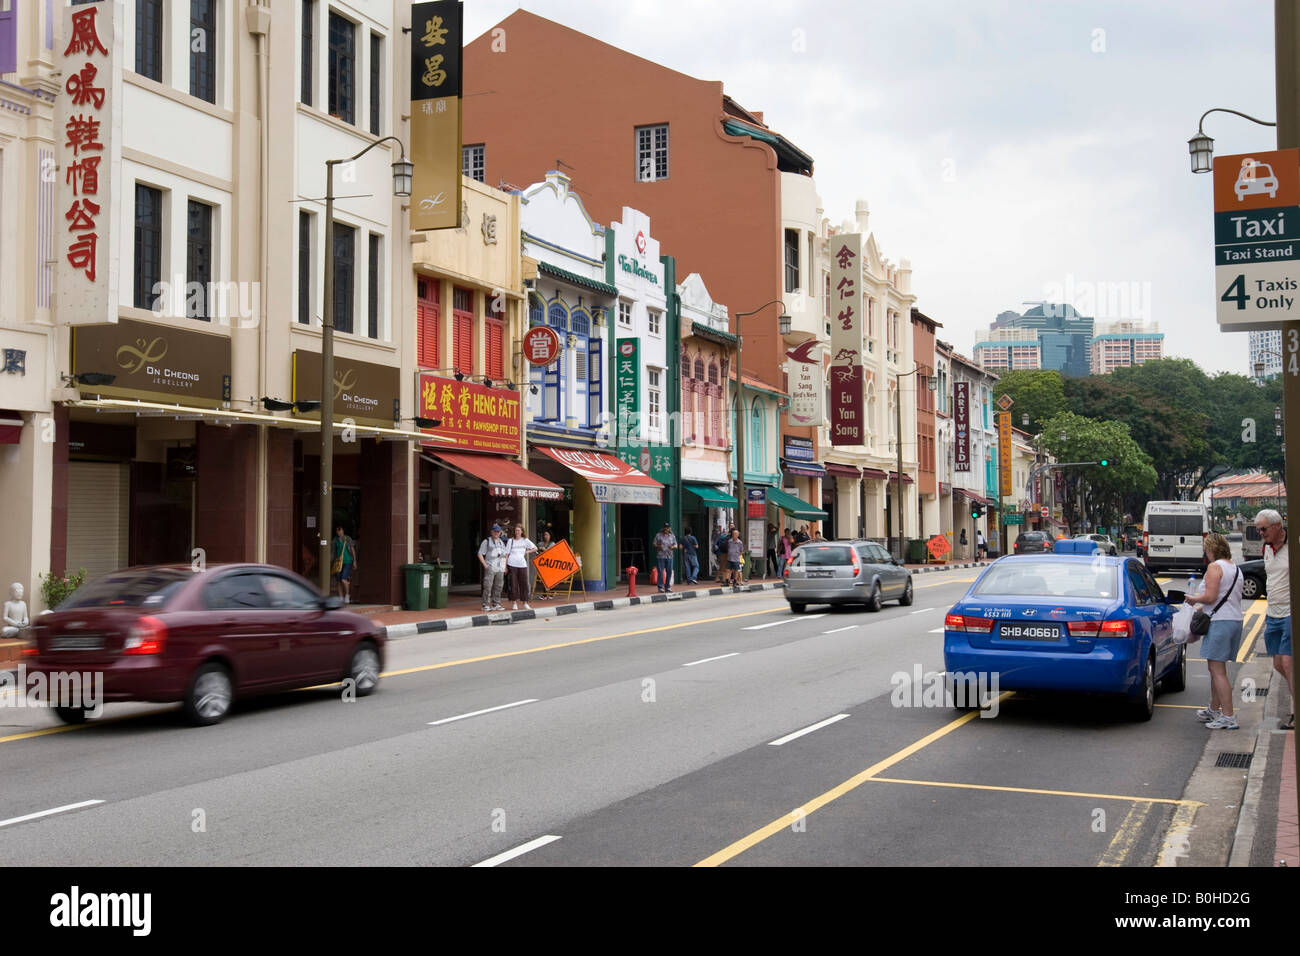 Street in Chinatown, storefronts on South Bridge Road in Singapore, Southeast Asia Stock Photo